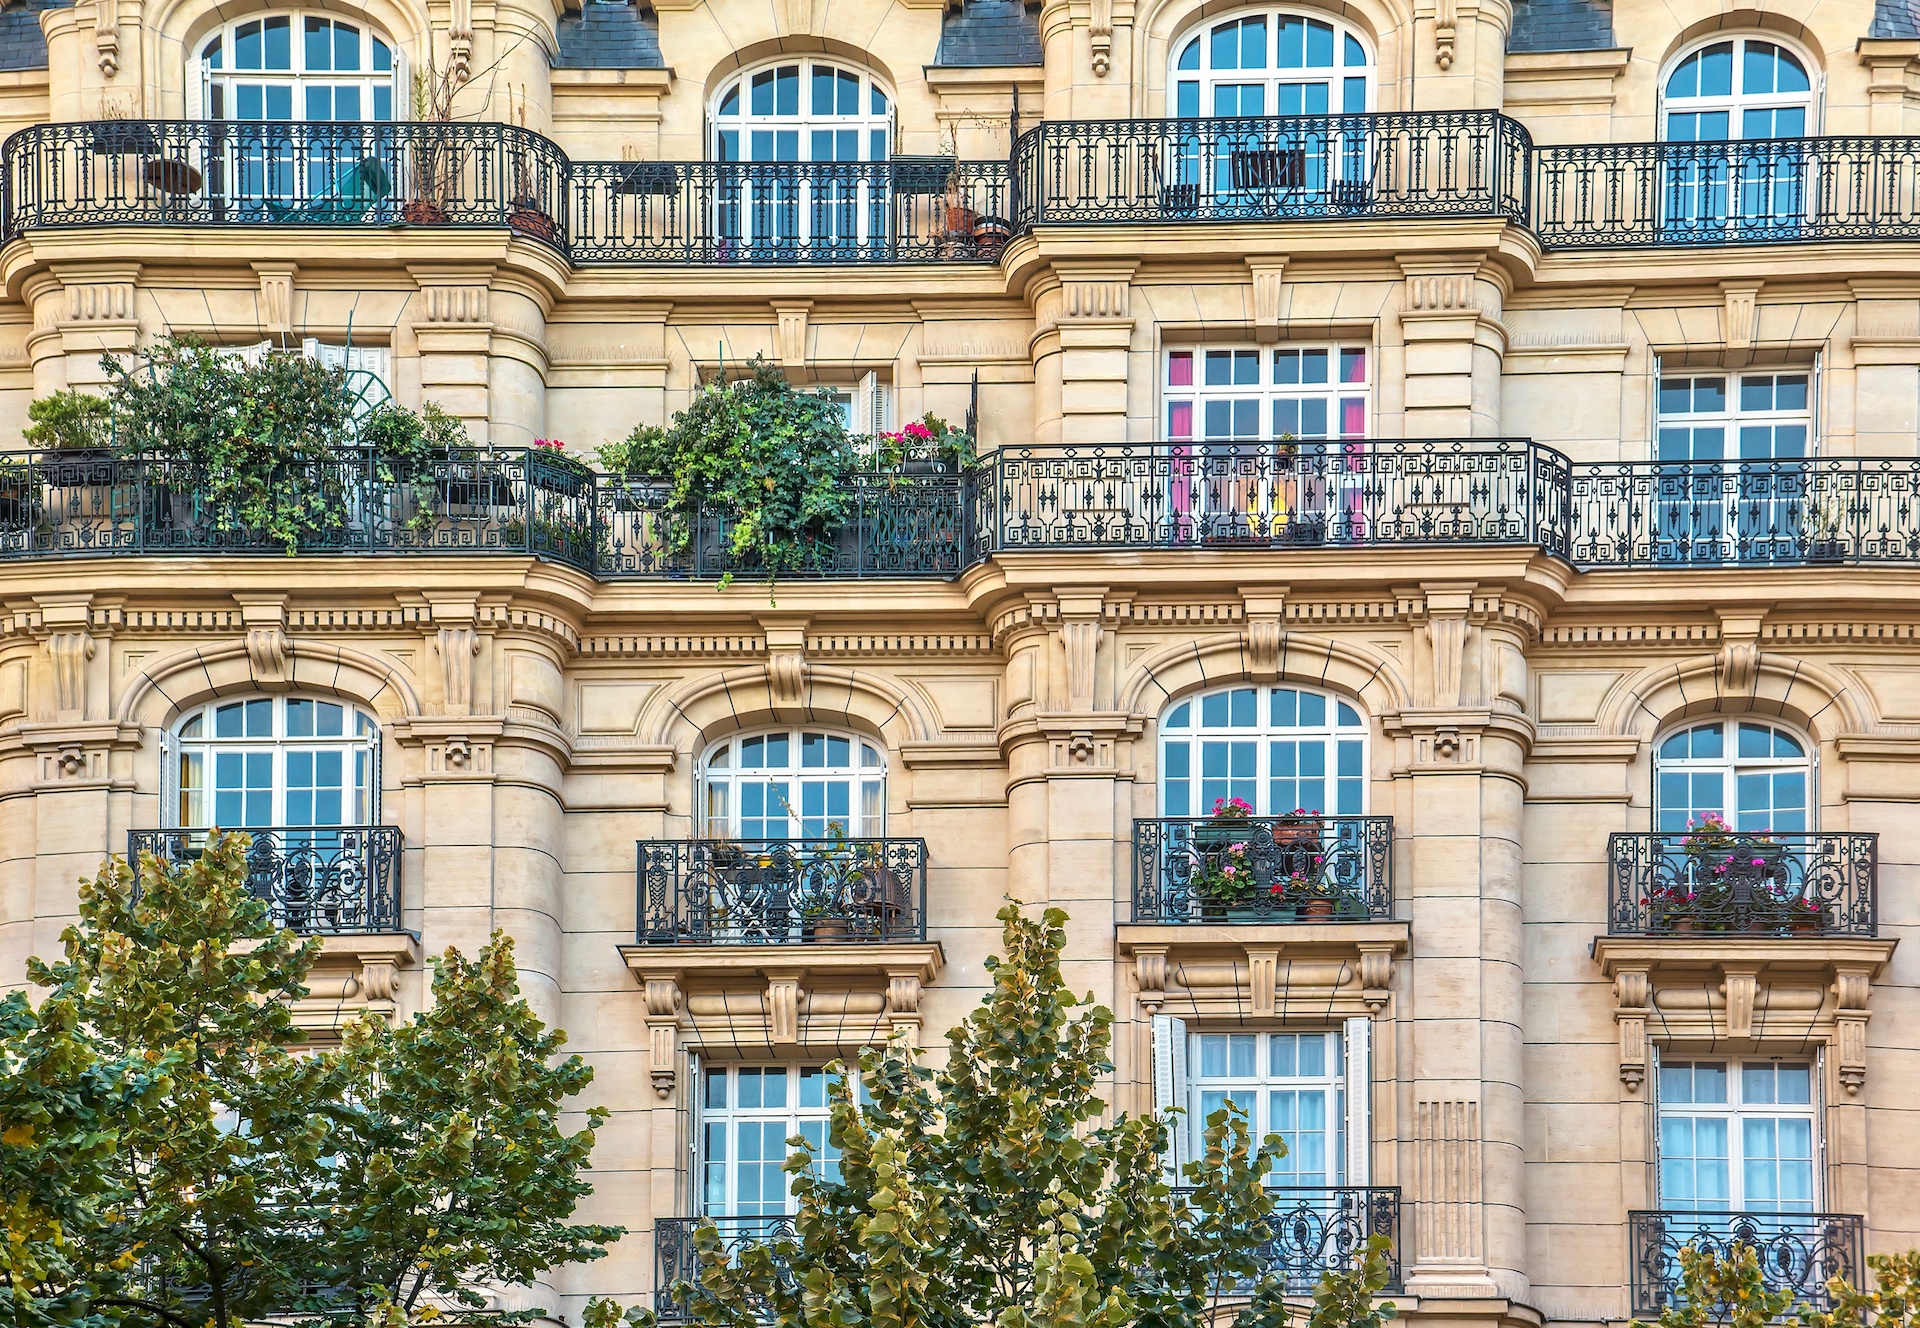 Street view of an old, elegant residential building facade in Paris, with ornate details in the stone walls, french doors and wrought iron railings on the balconies.